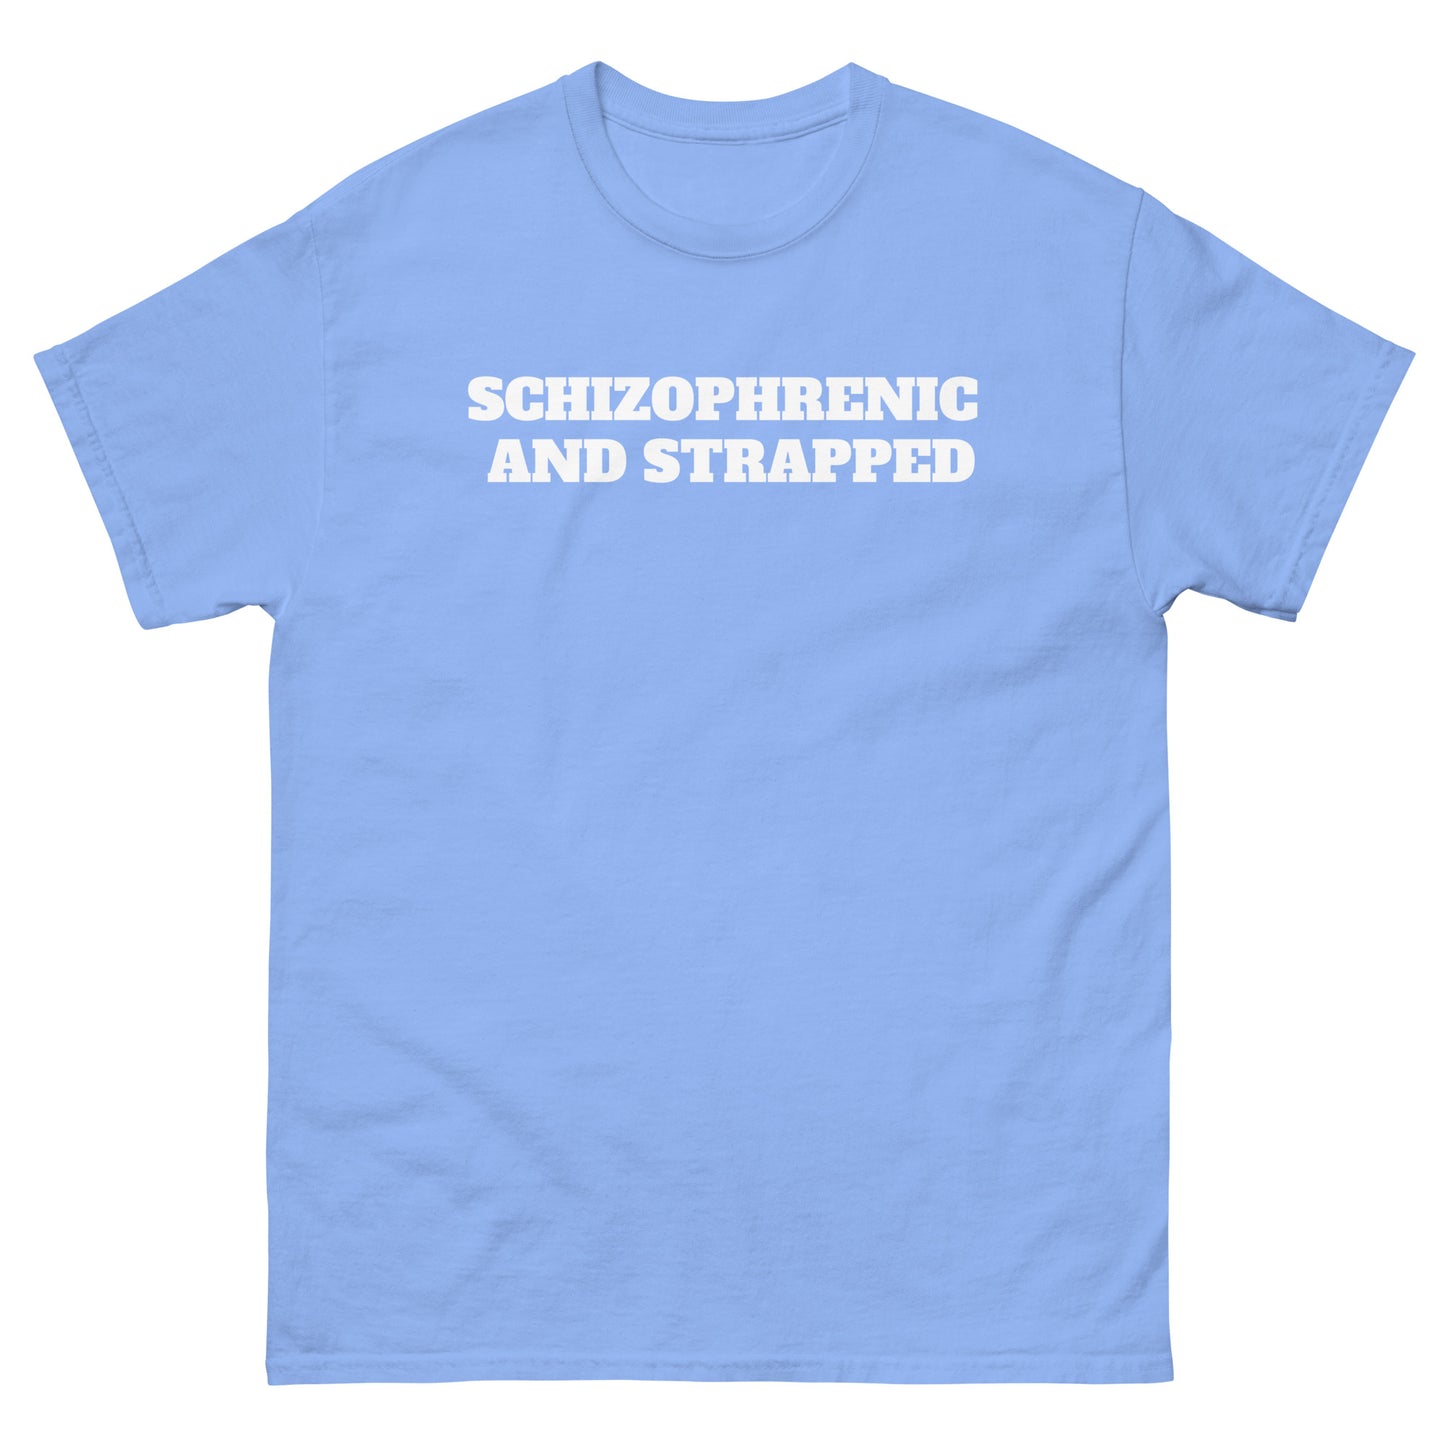 Schizophrenic And Strapped Budget Tee